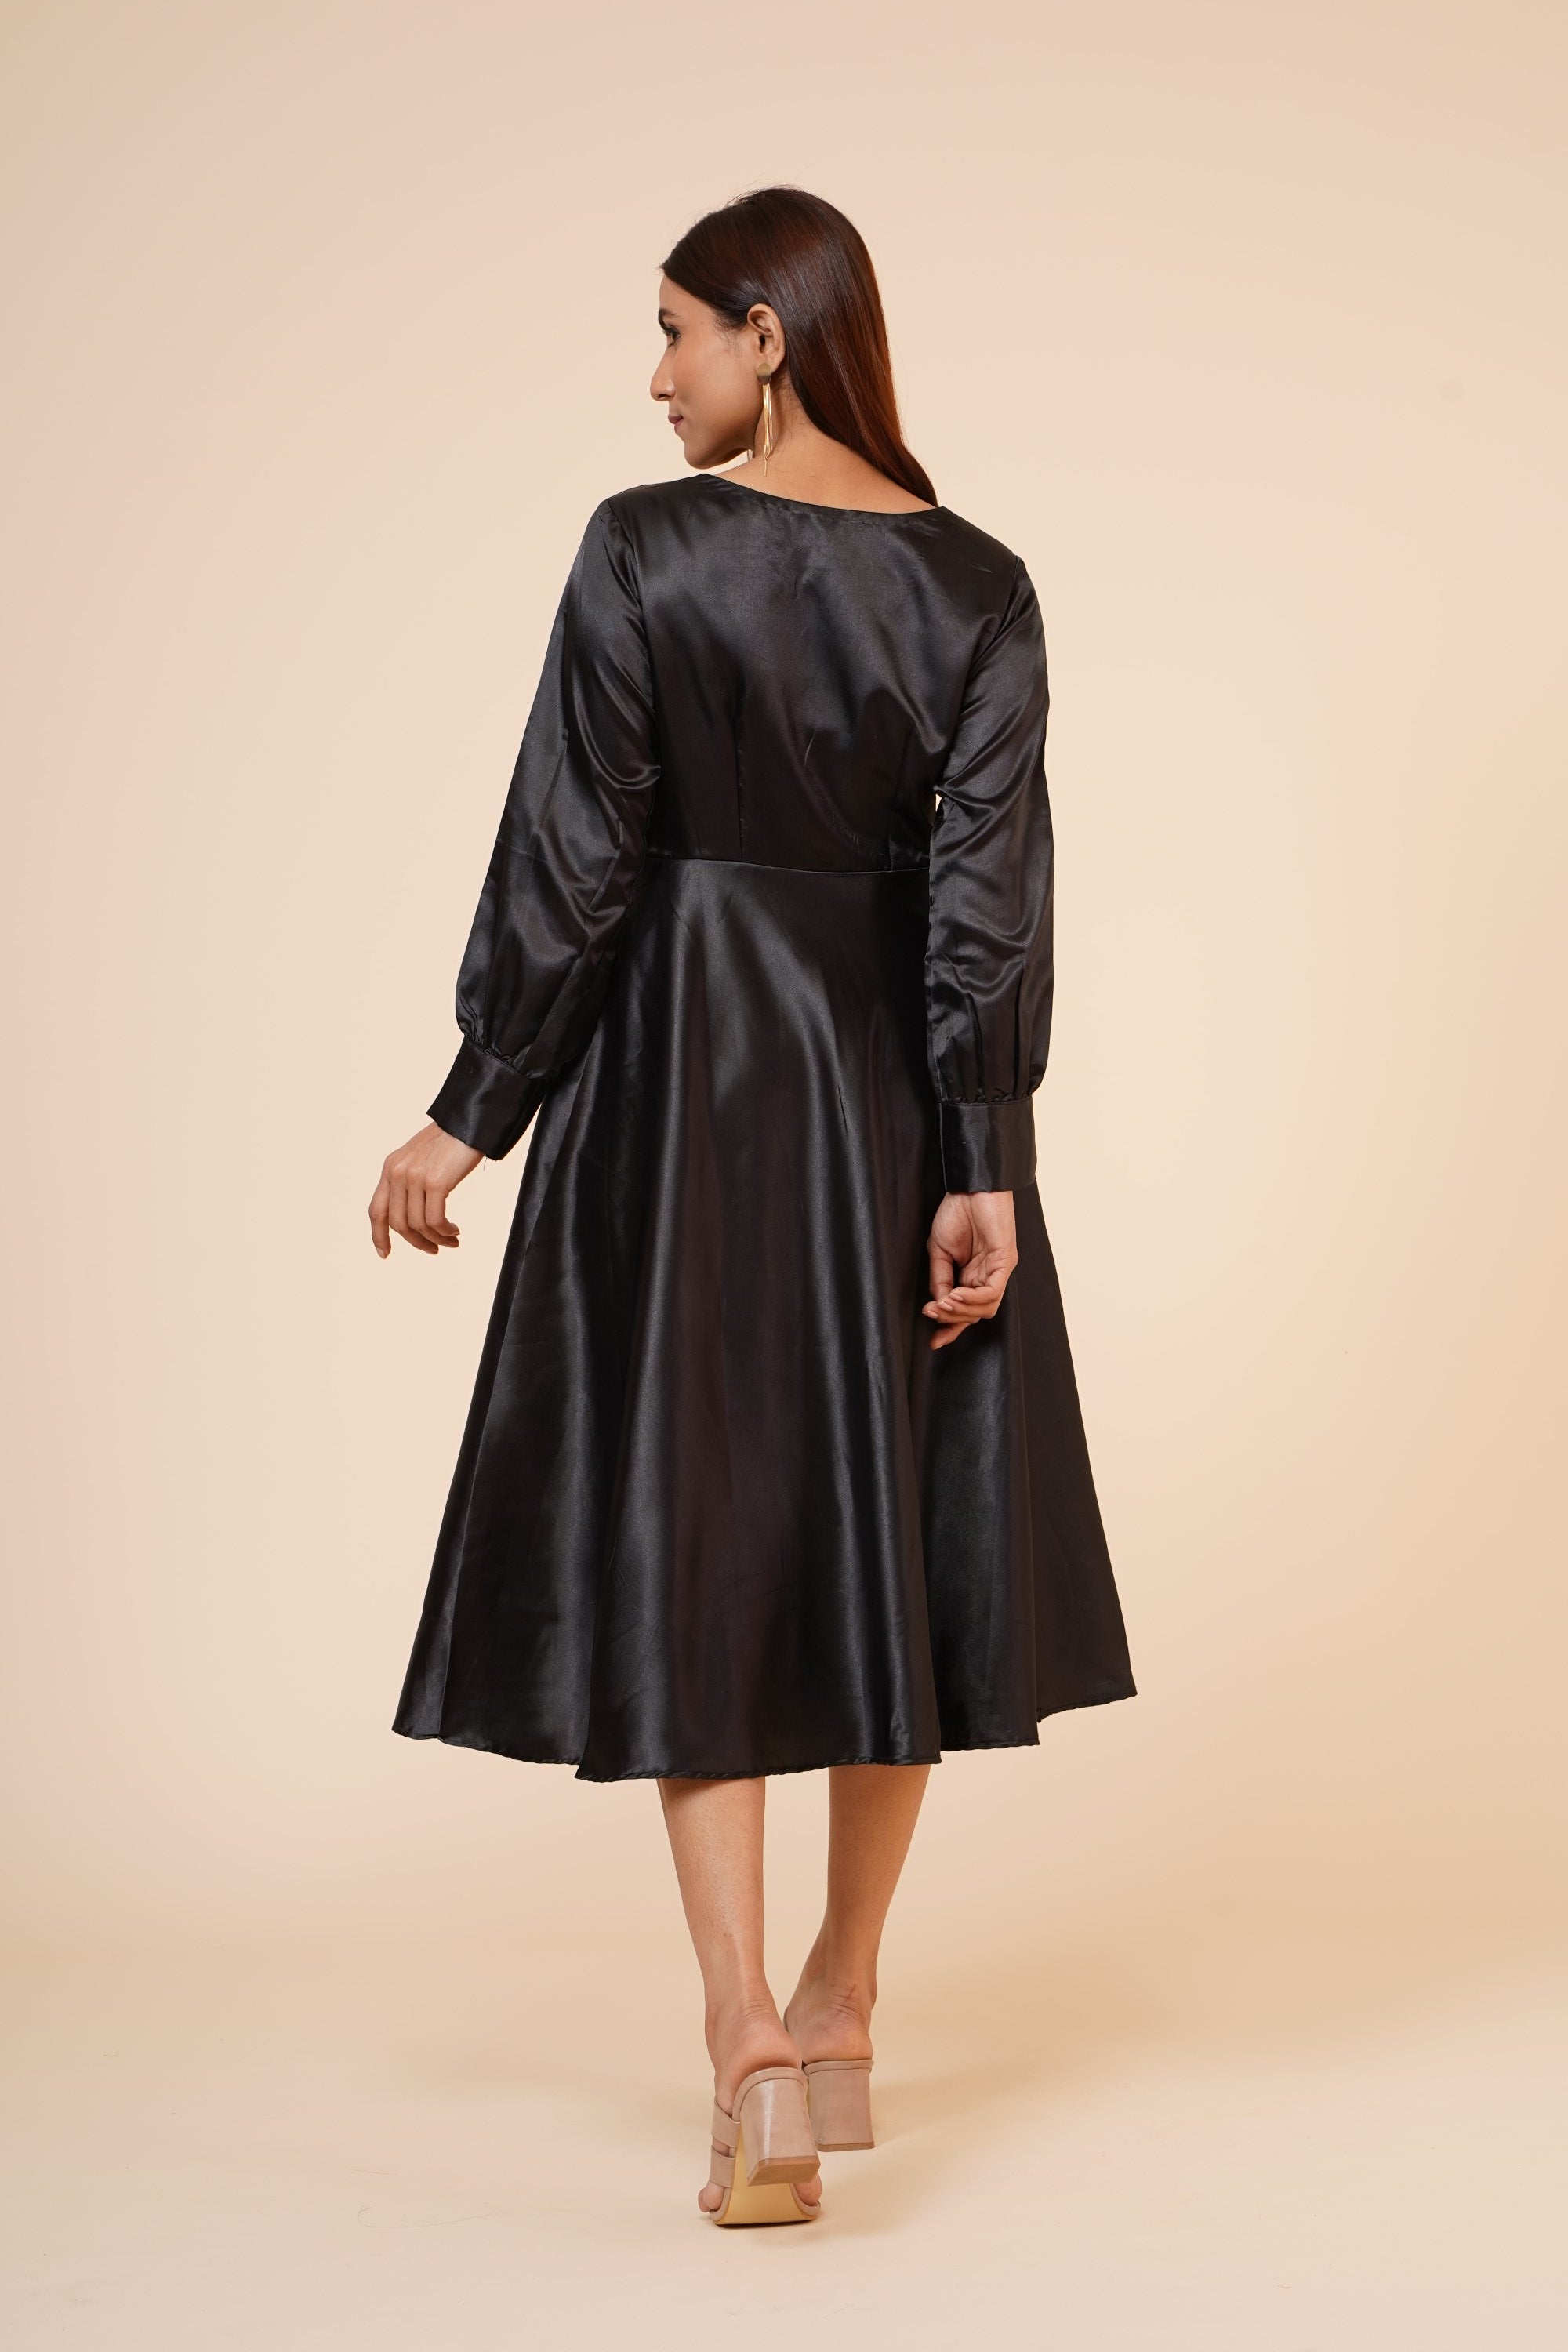 Women's Empire Line With Cuff Satin Wrap Dress Black - MIRACOLOS by Ruchi